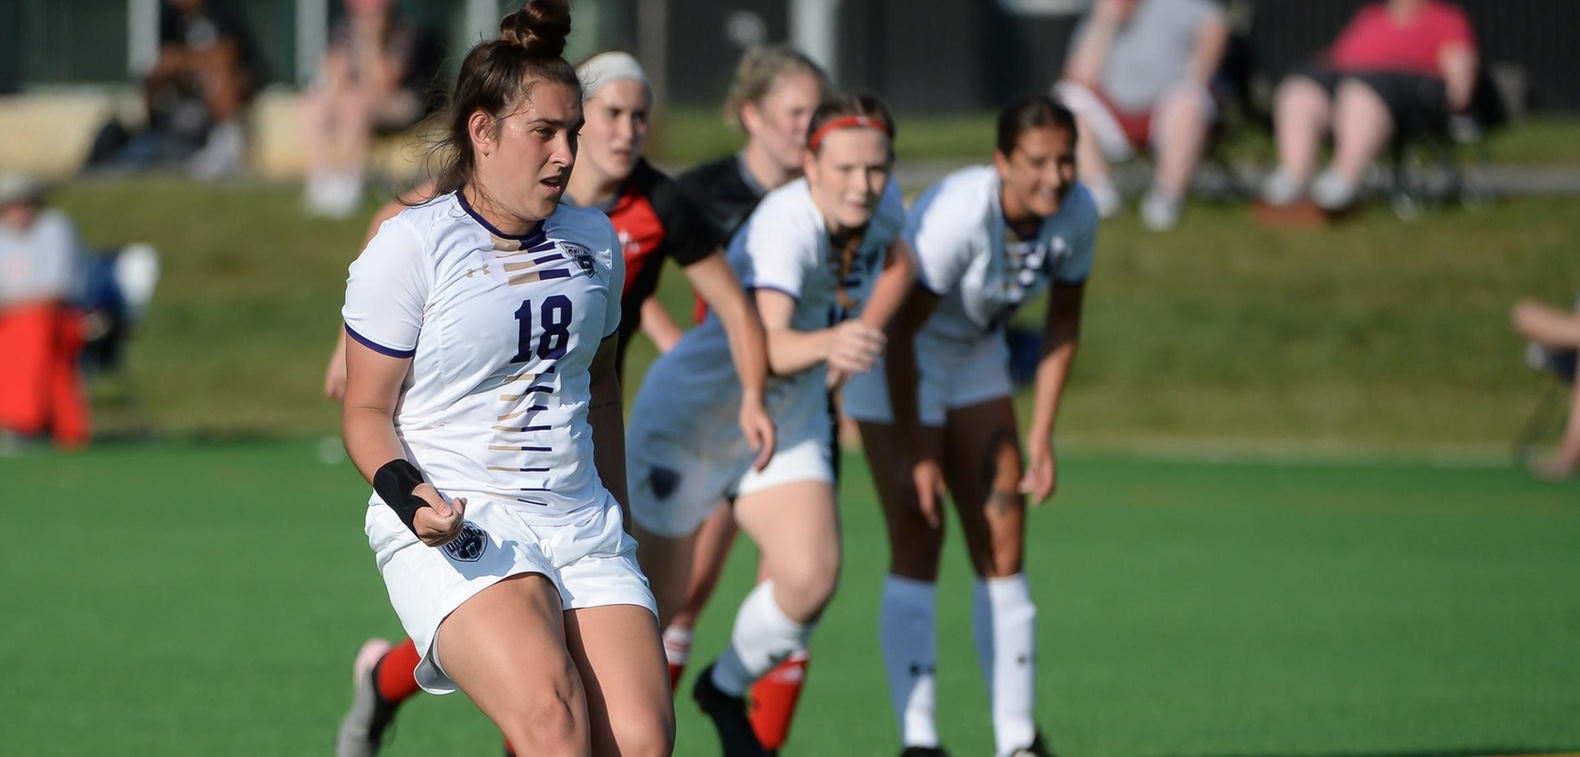 Bruna Bielski steps to the spot to deliver the game-winning goal on Saturday afternoon.